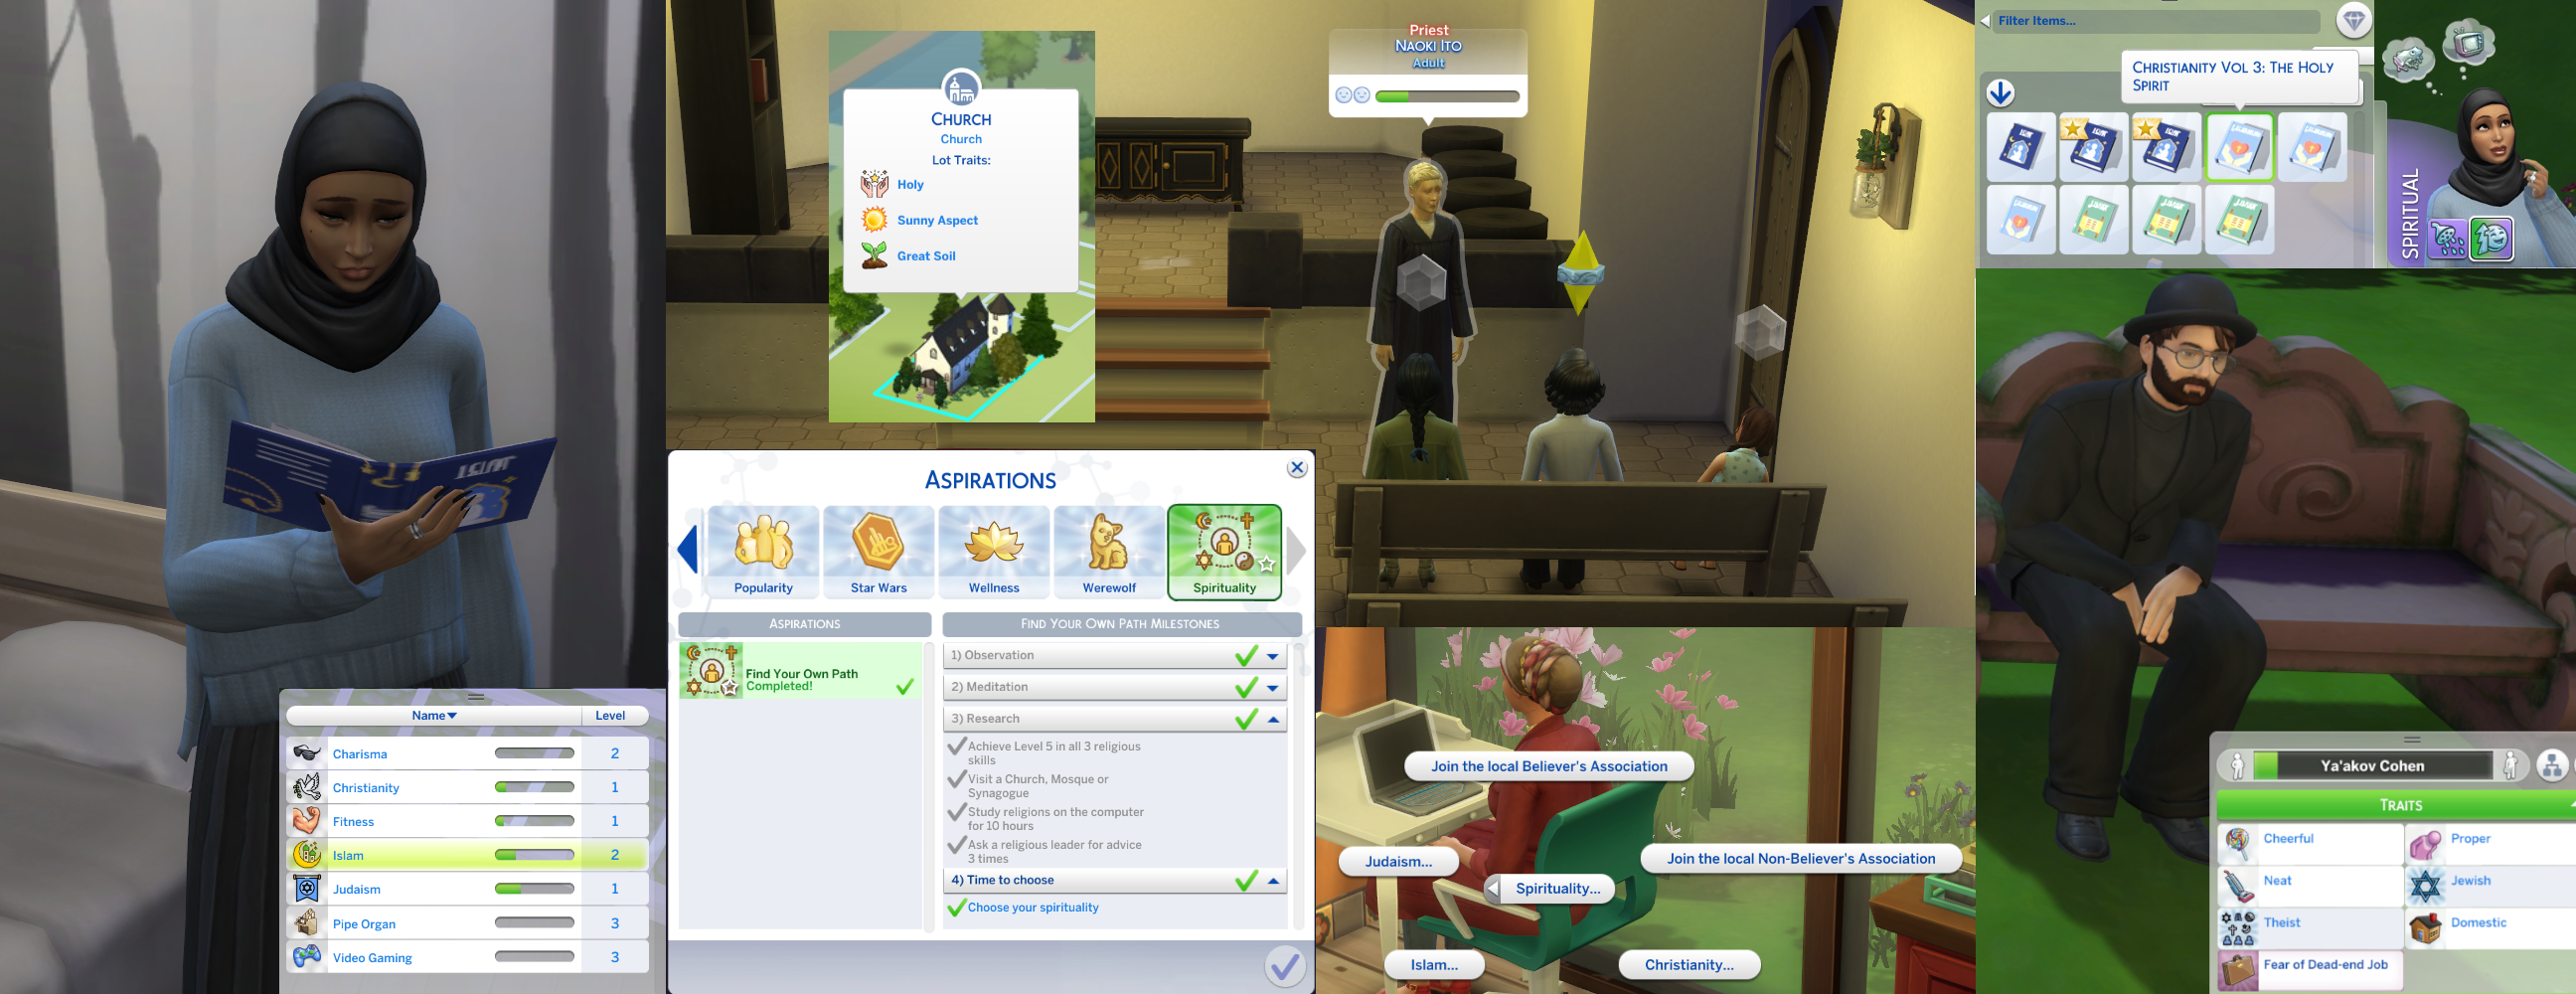 Mod The Sims - Religion in The Sims